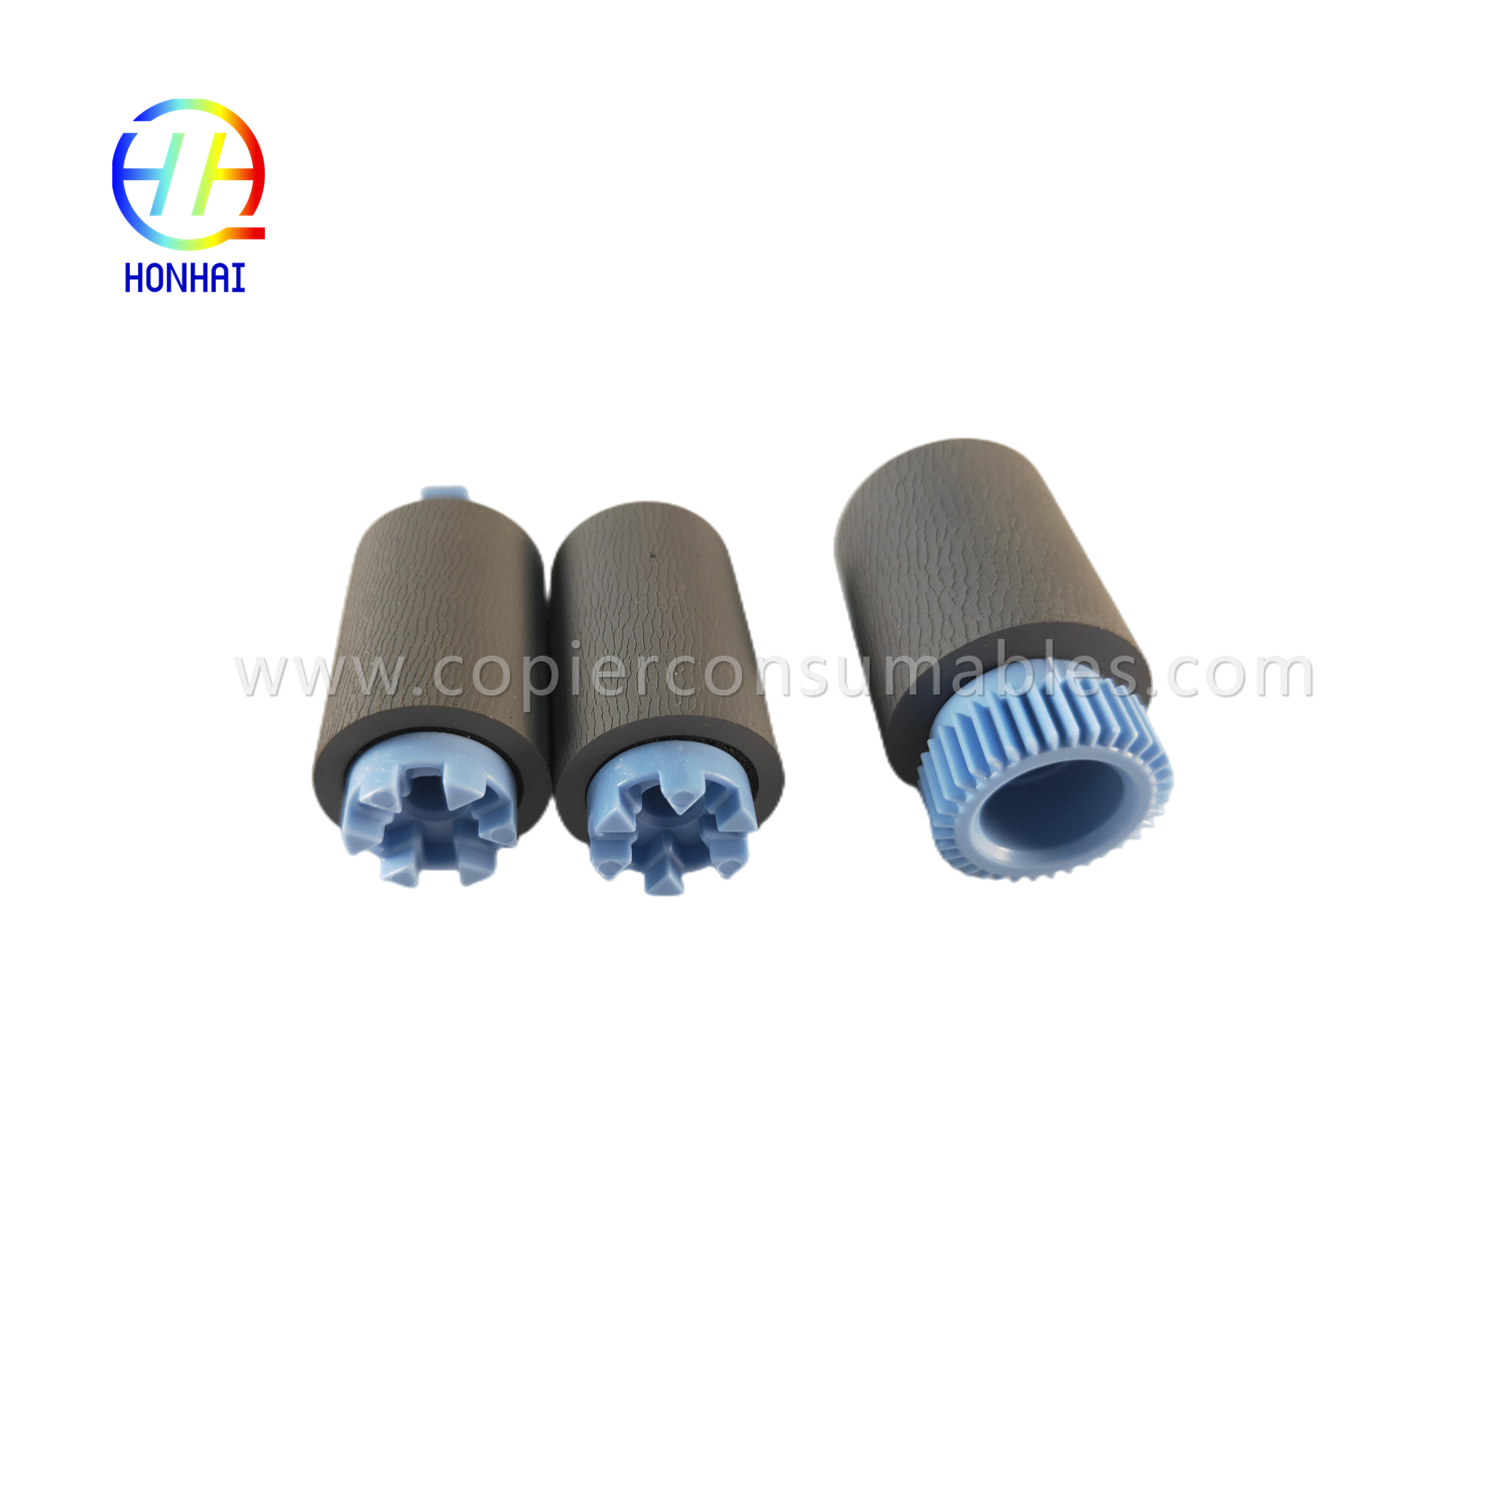 Tray 2 – 5 Pickup  Feed  Separation Roller SET  for HP A7W93-67082 MFP 785f 780dn  E77650z  E77660z E77650dn E77660dn P77740dn P77750Z P77760Z P75050dn P75050dw